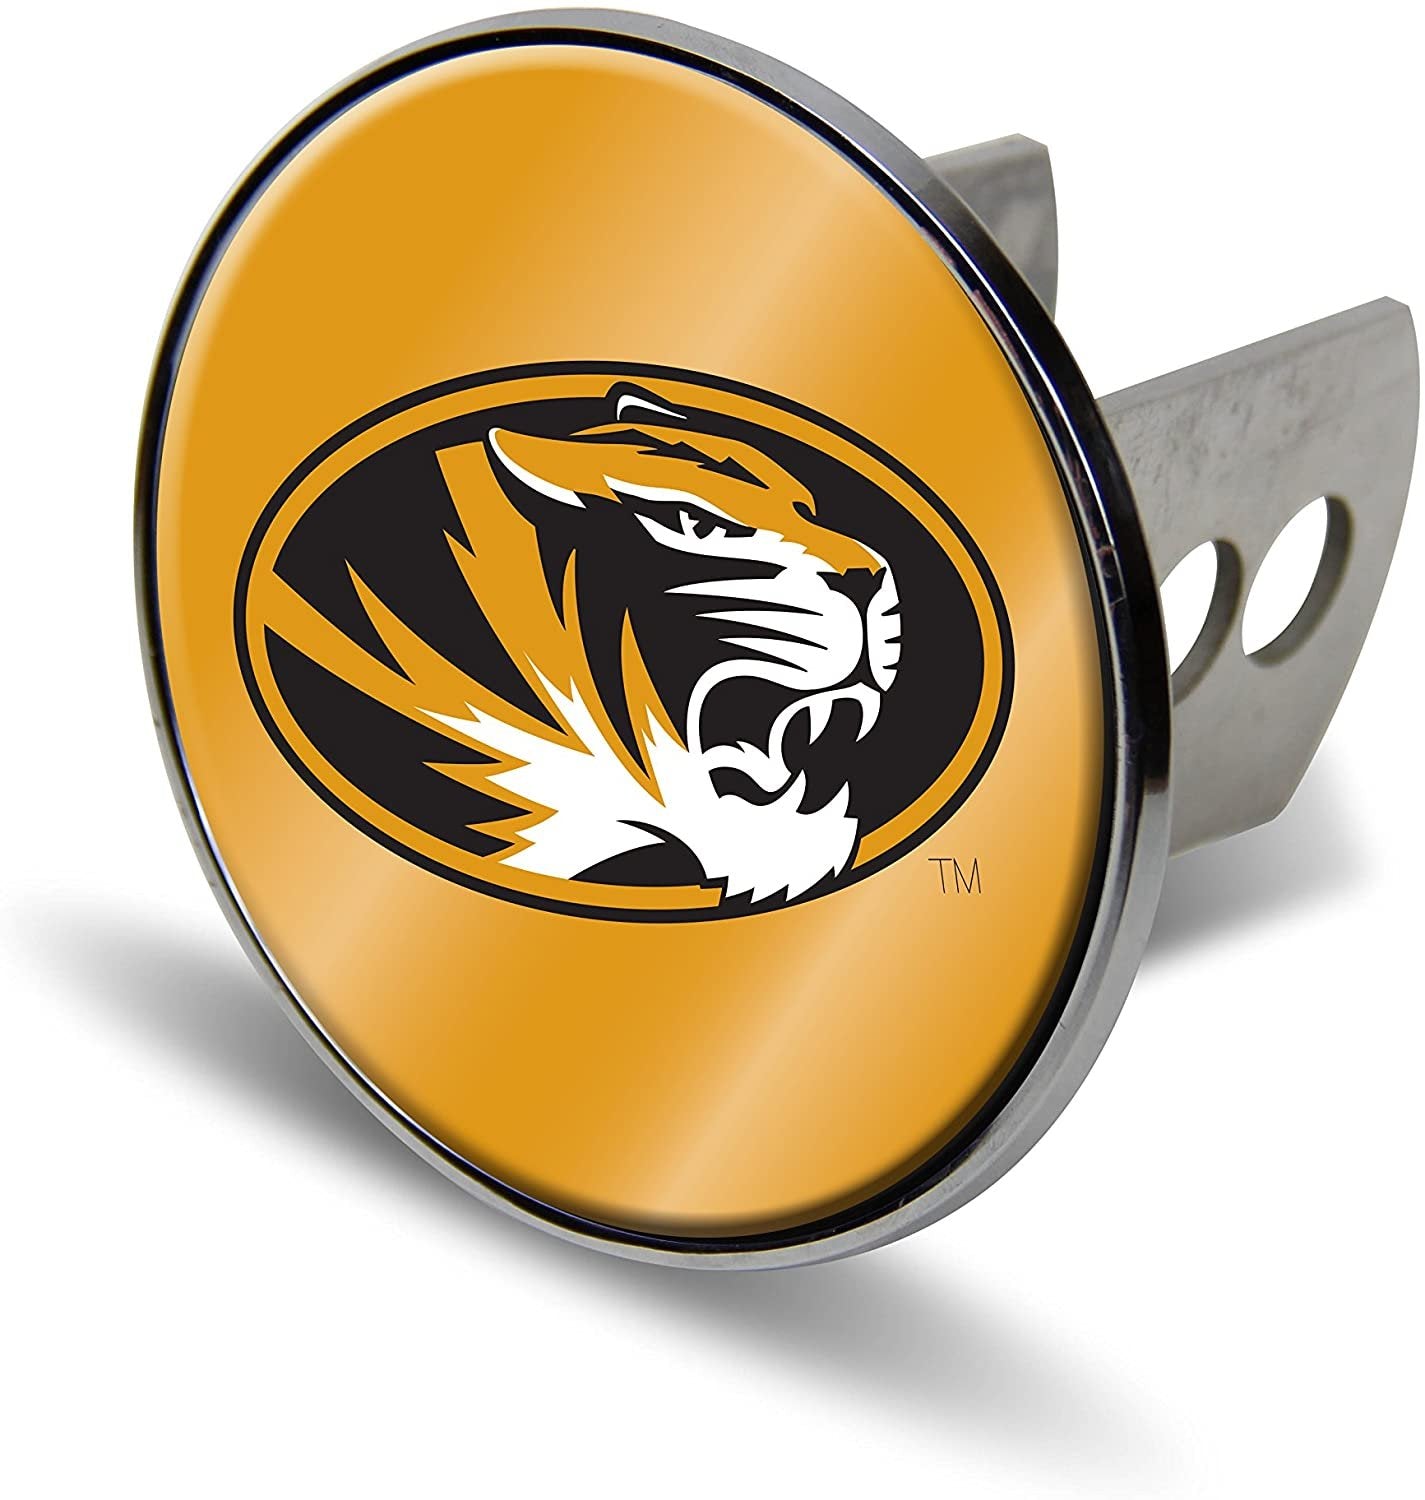 Missouri Tigers Metal Hitch Cover with Laser Cut Mirrored Acrylic Insert for 2 Inch Receiver University of